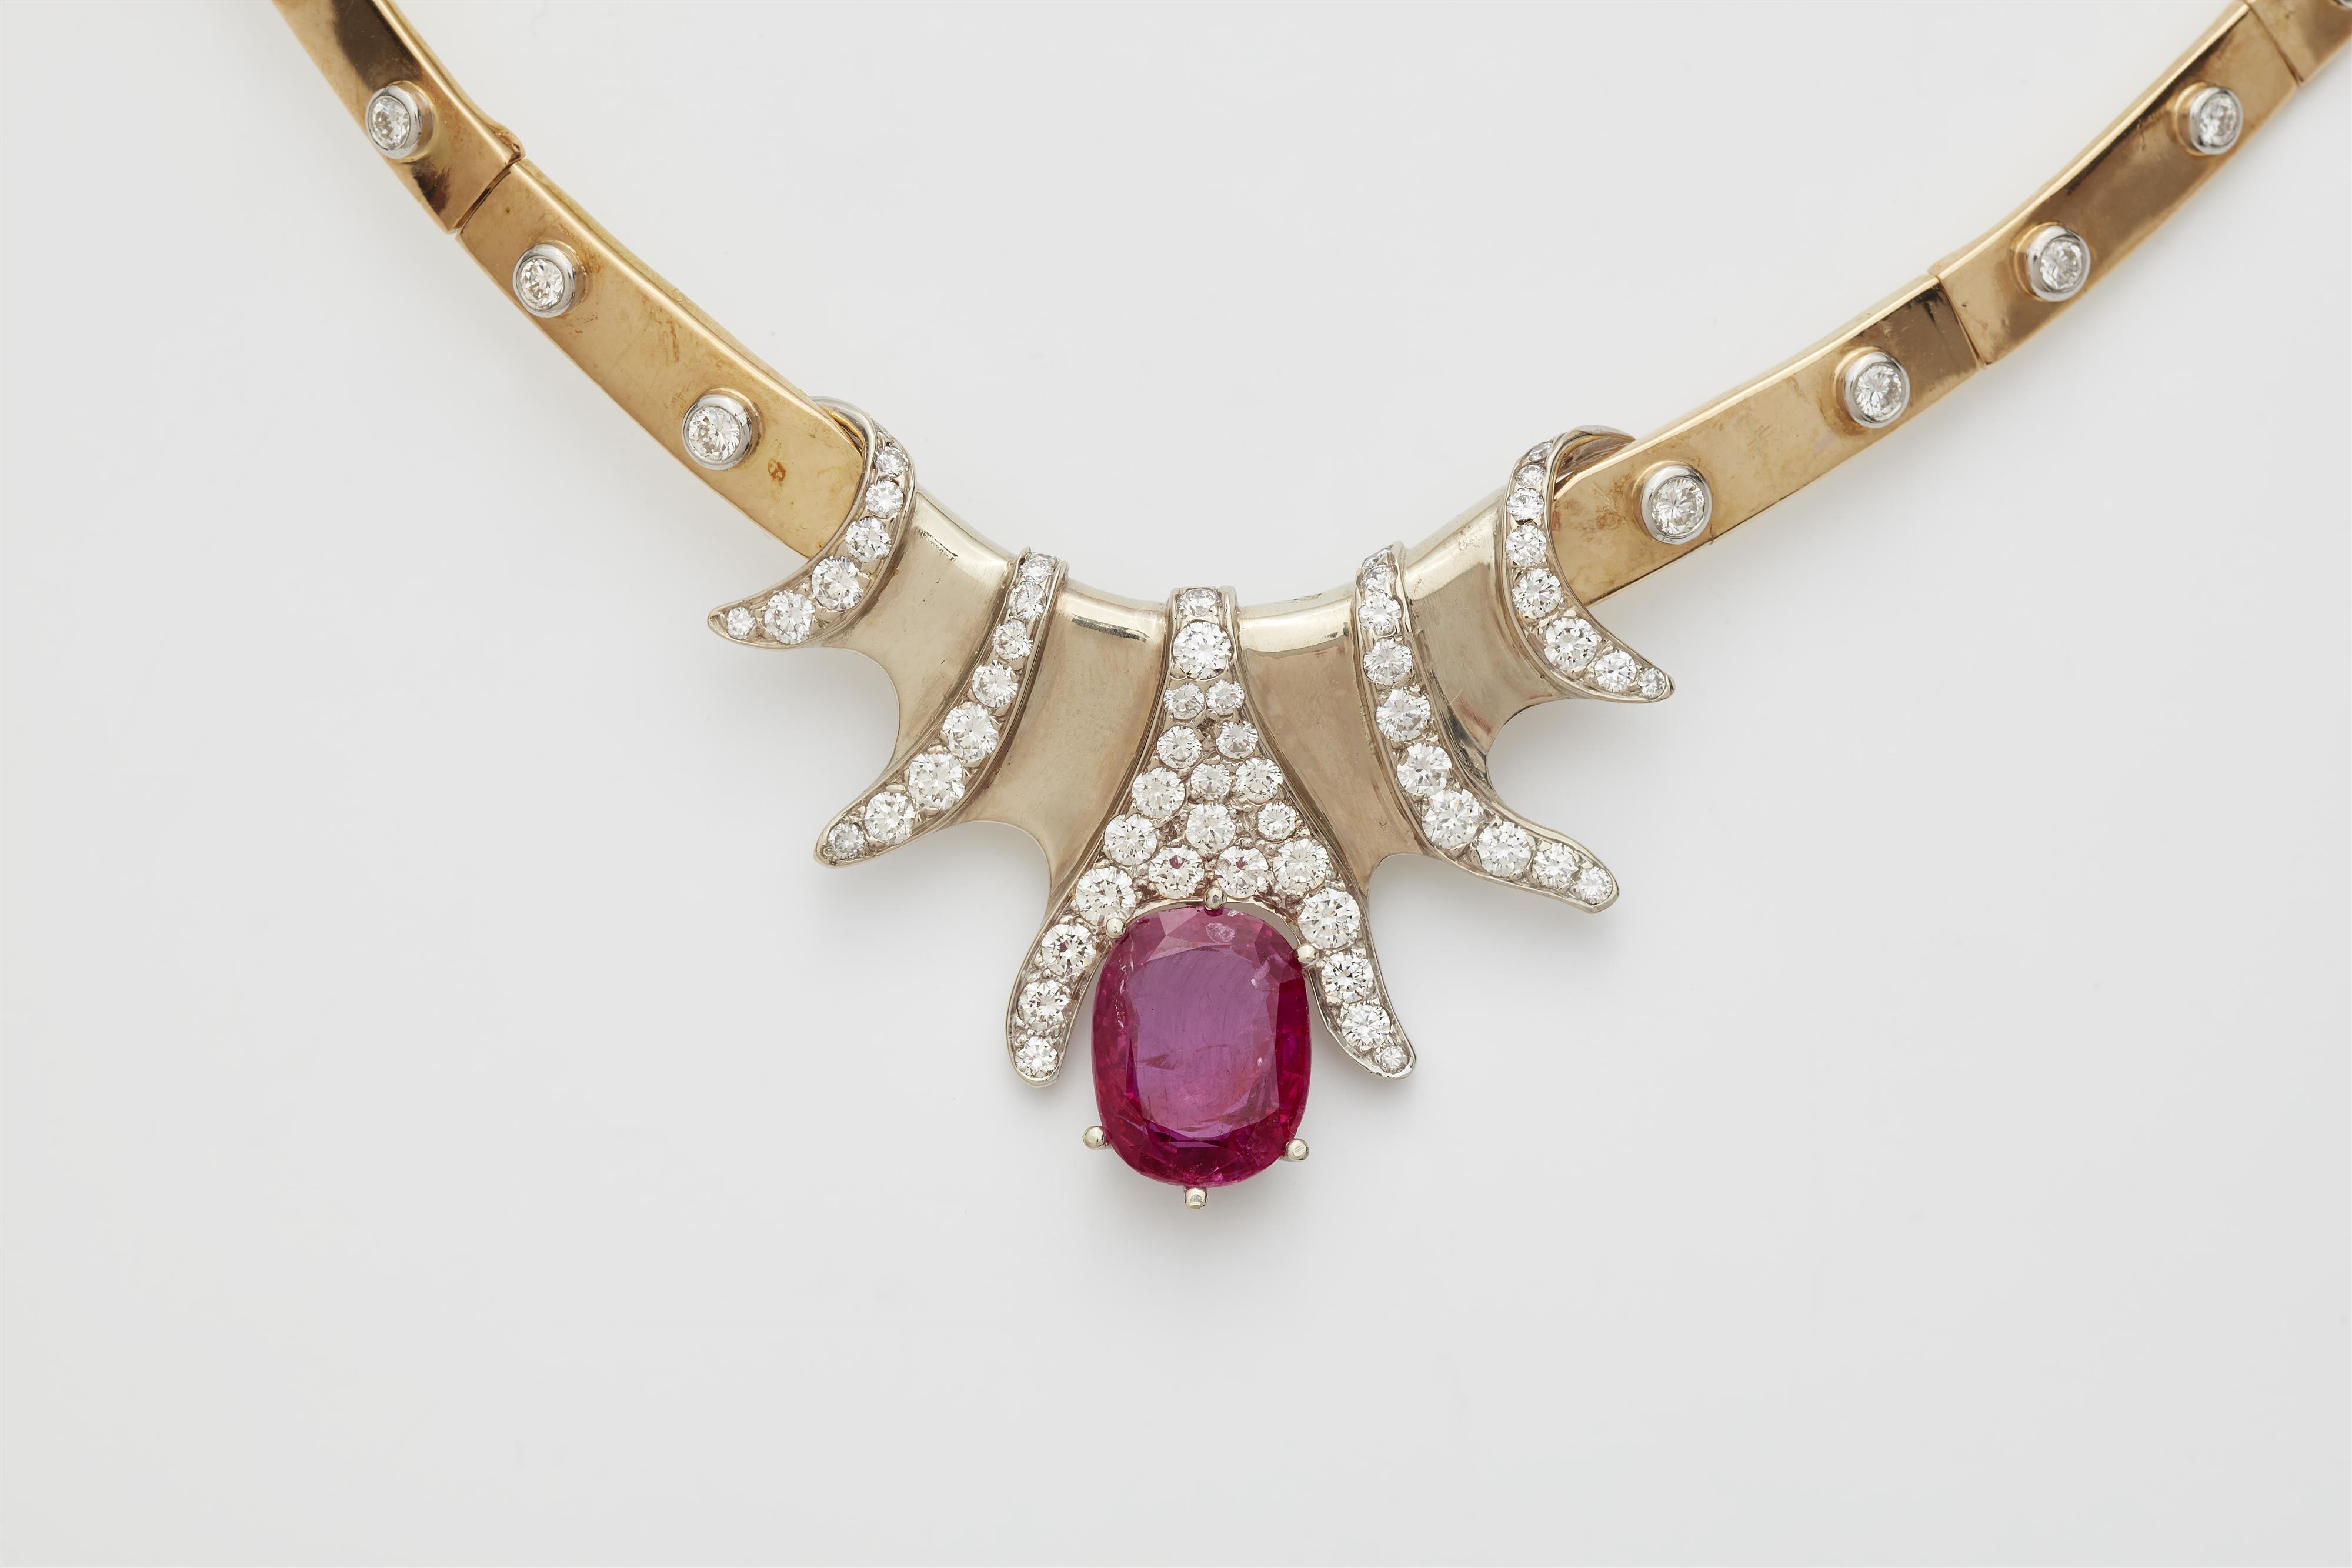 An Austrian 18k bicolour gold diamond necklace with an important natural Burmese ruby c. 6.5 ct. - image-2